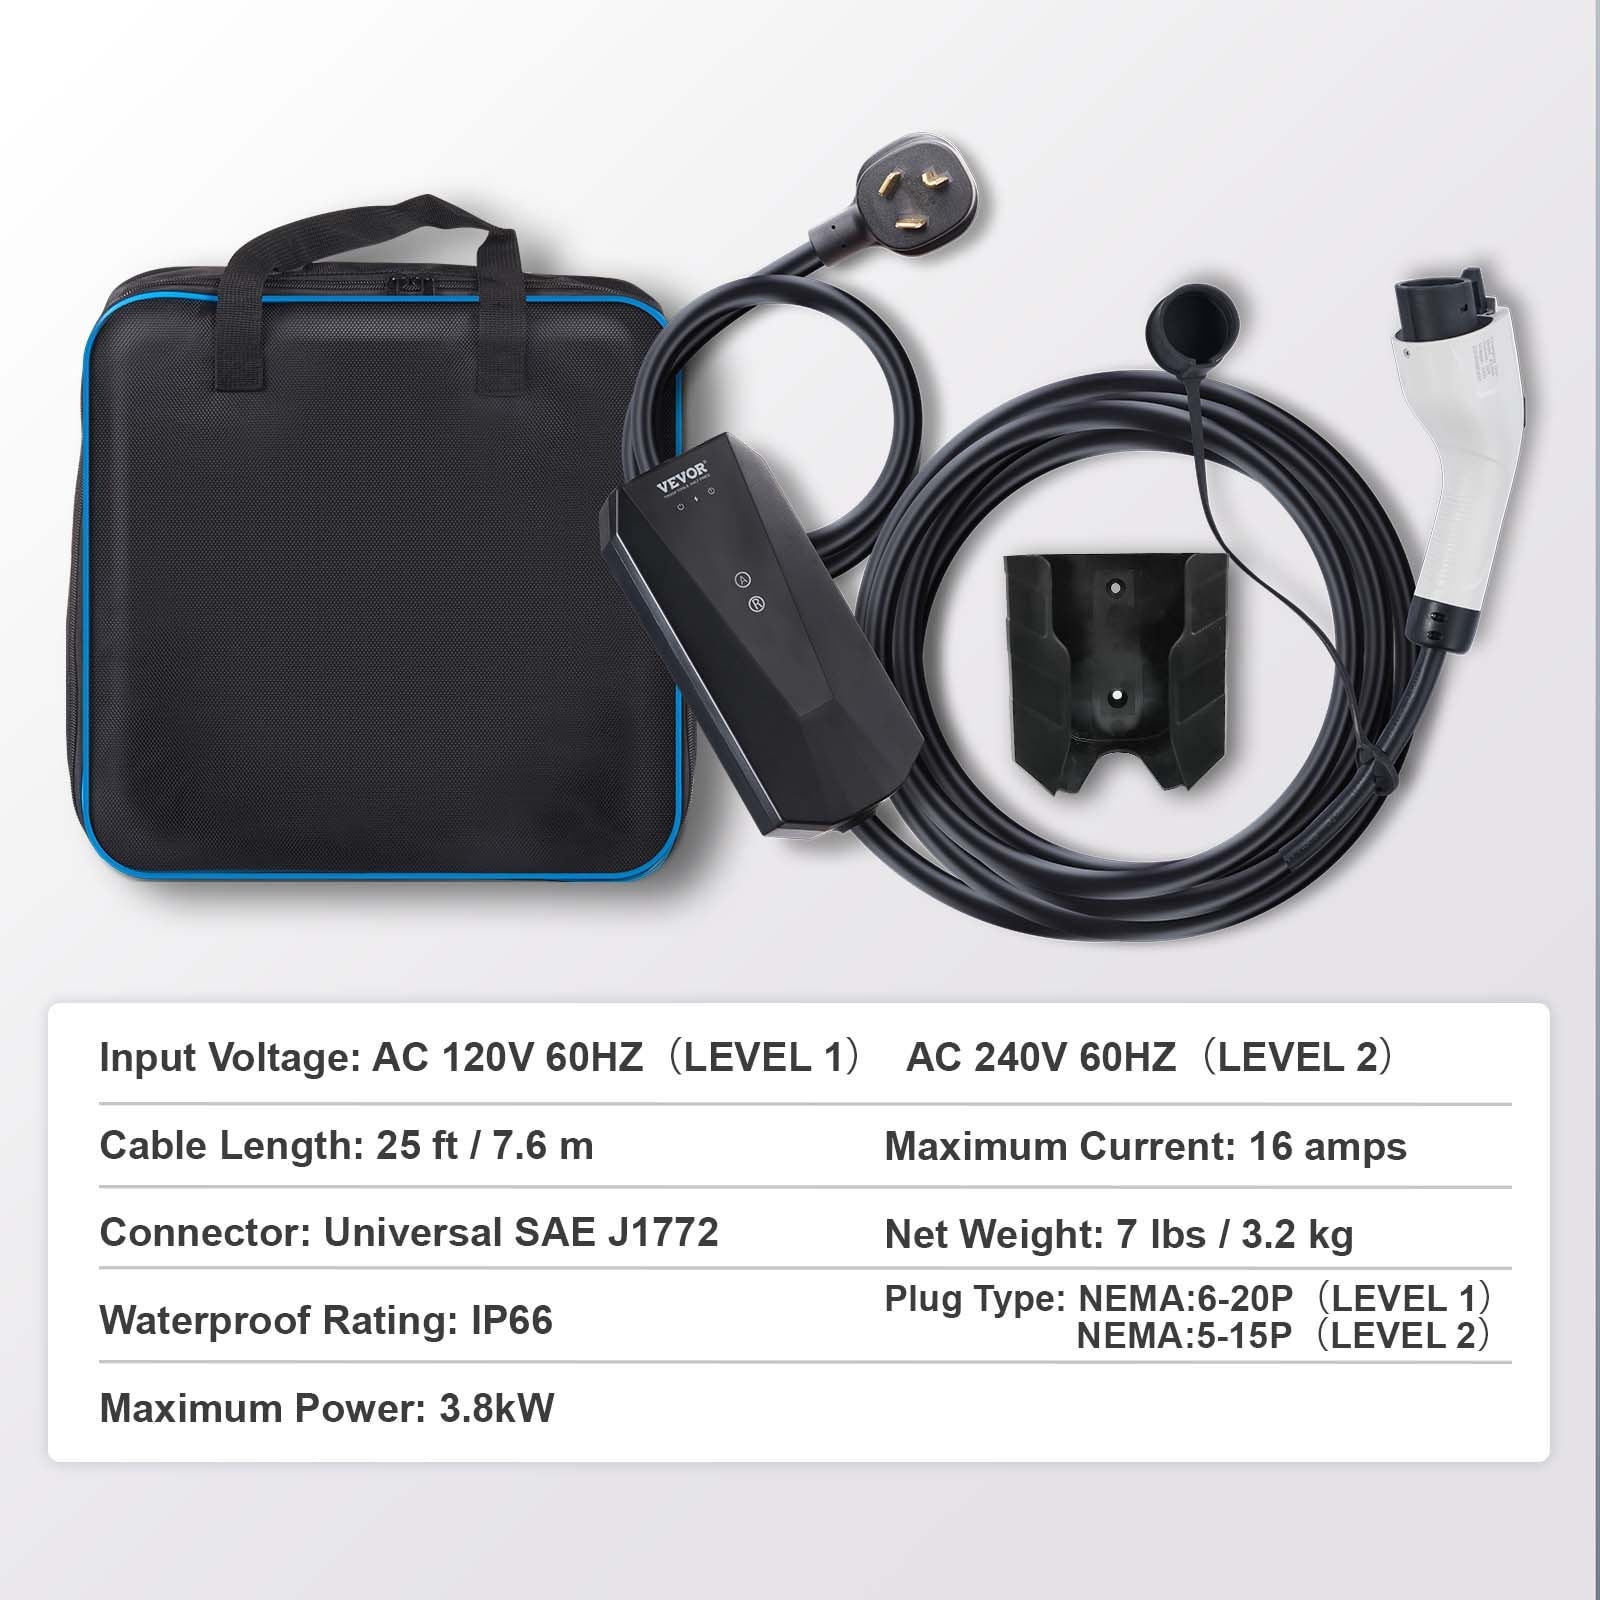 VDL POWER Portable EV Charger , Type 2 EV Charger, Charging Cable